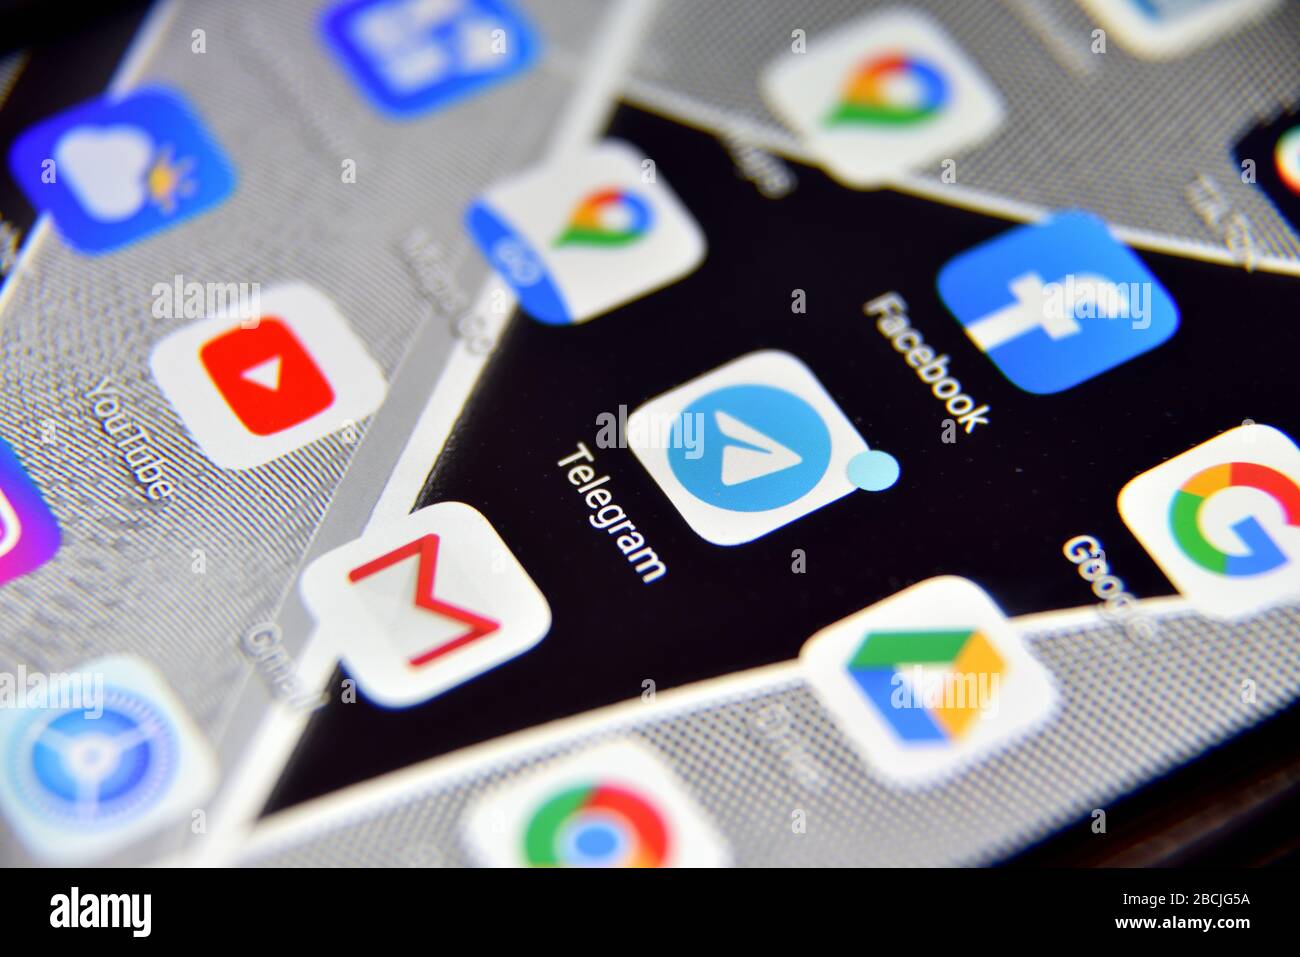 Valverde (CT), Italy - April 04, 2020: Close-up view of Telegram icon app on an Android smartphone, including other icons. Stock Photo